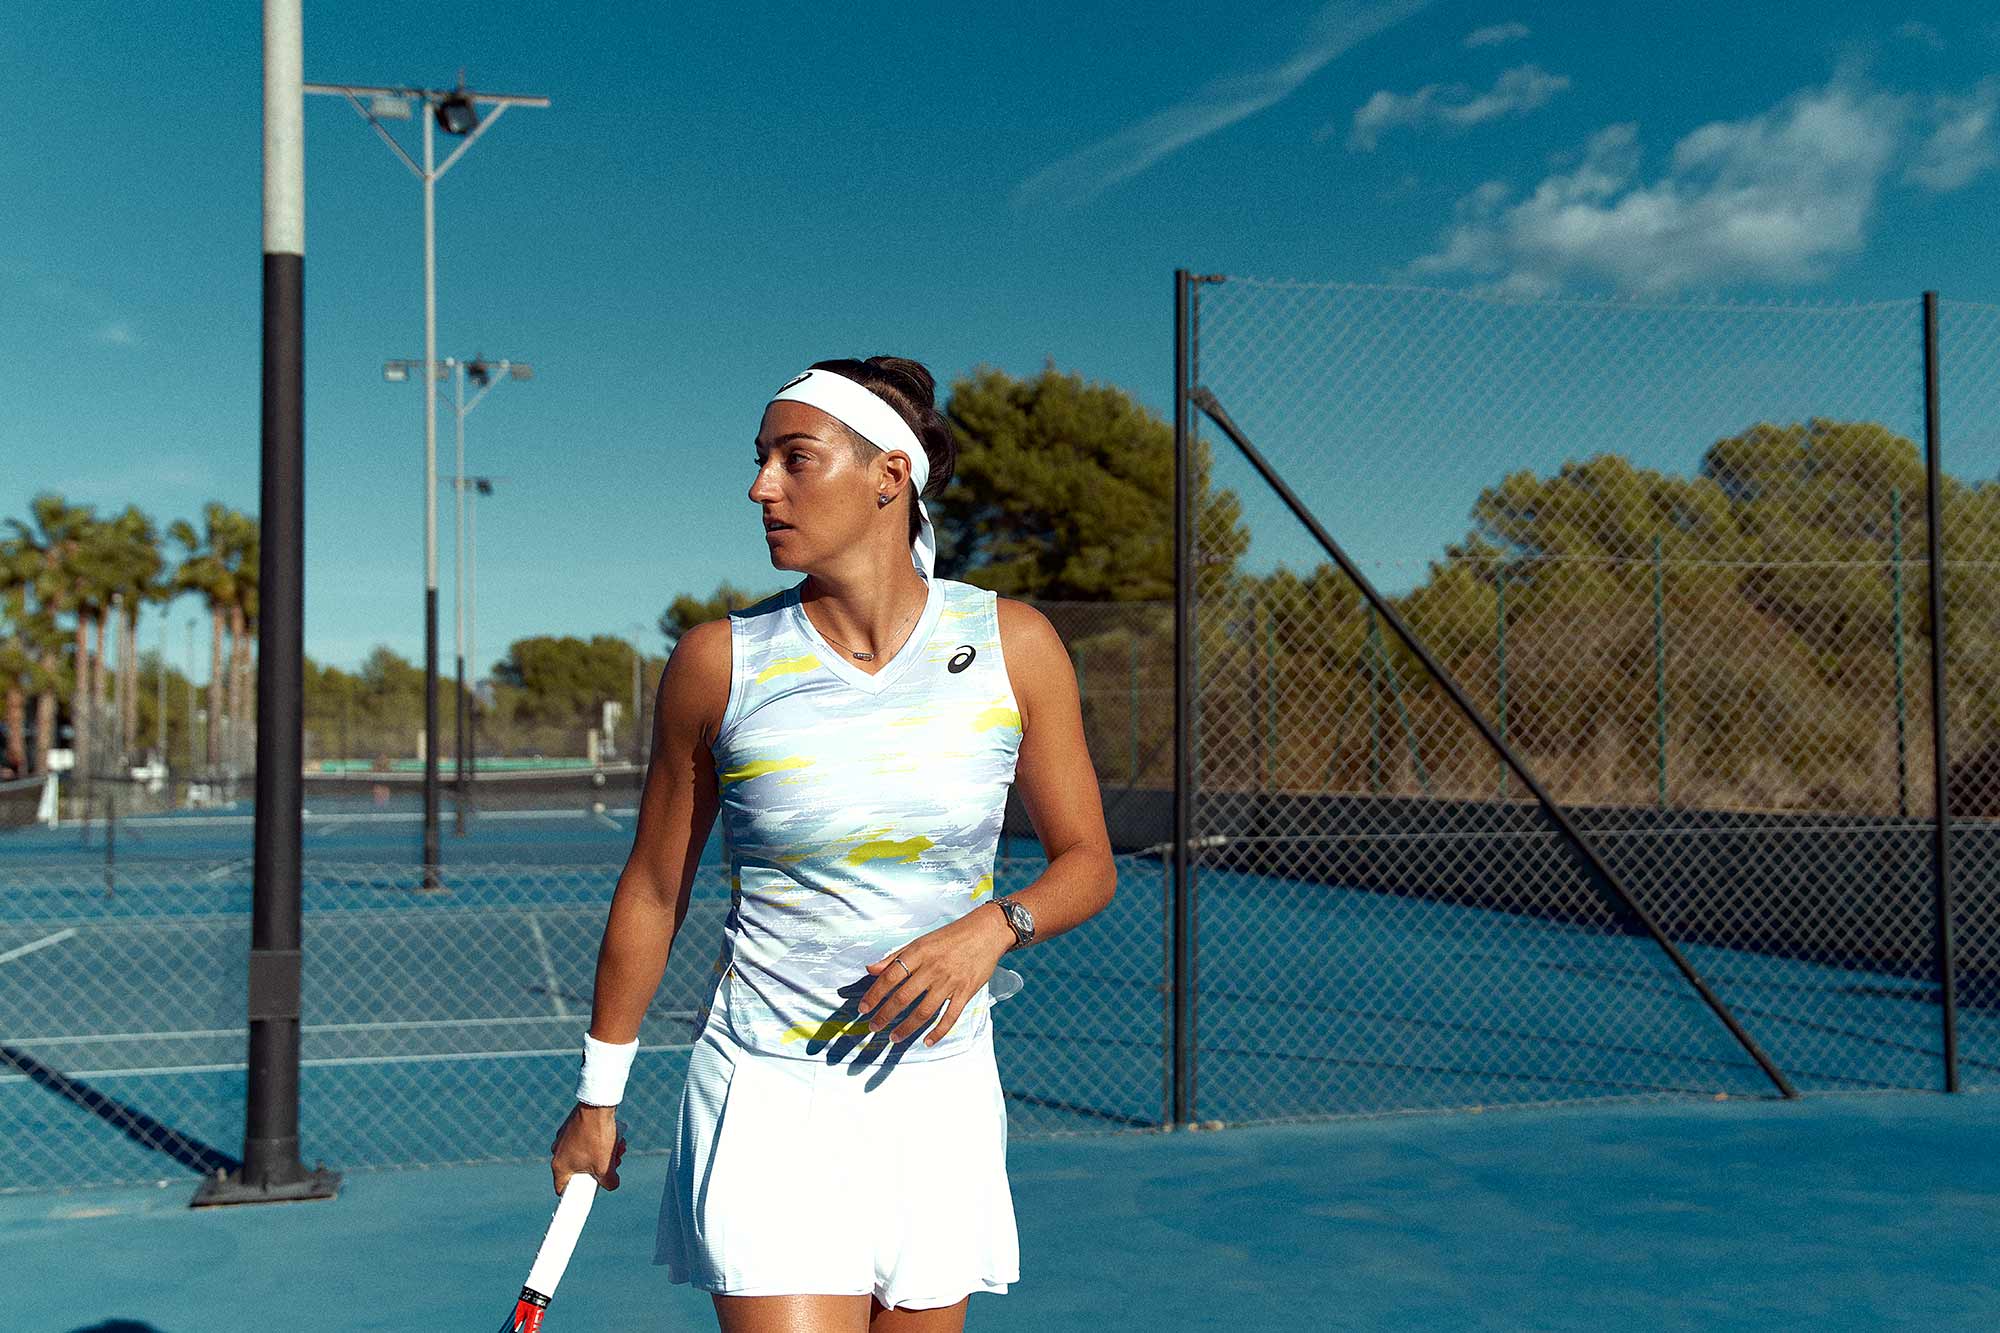 Campaign imagery shot for Asics Europe at the IQL Tennis Academy located Southeast of Spain